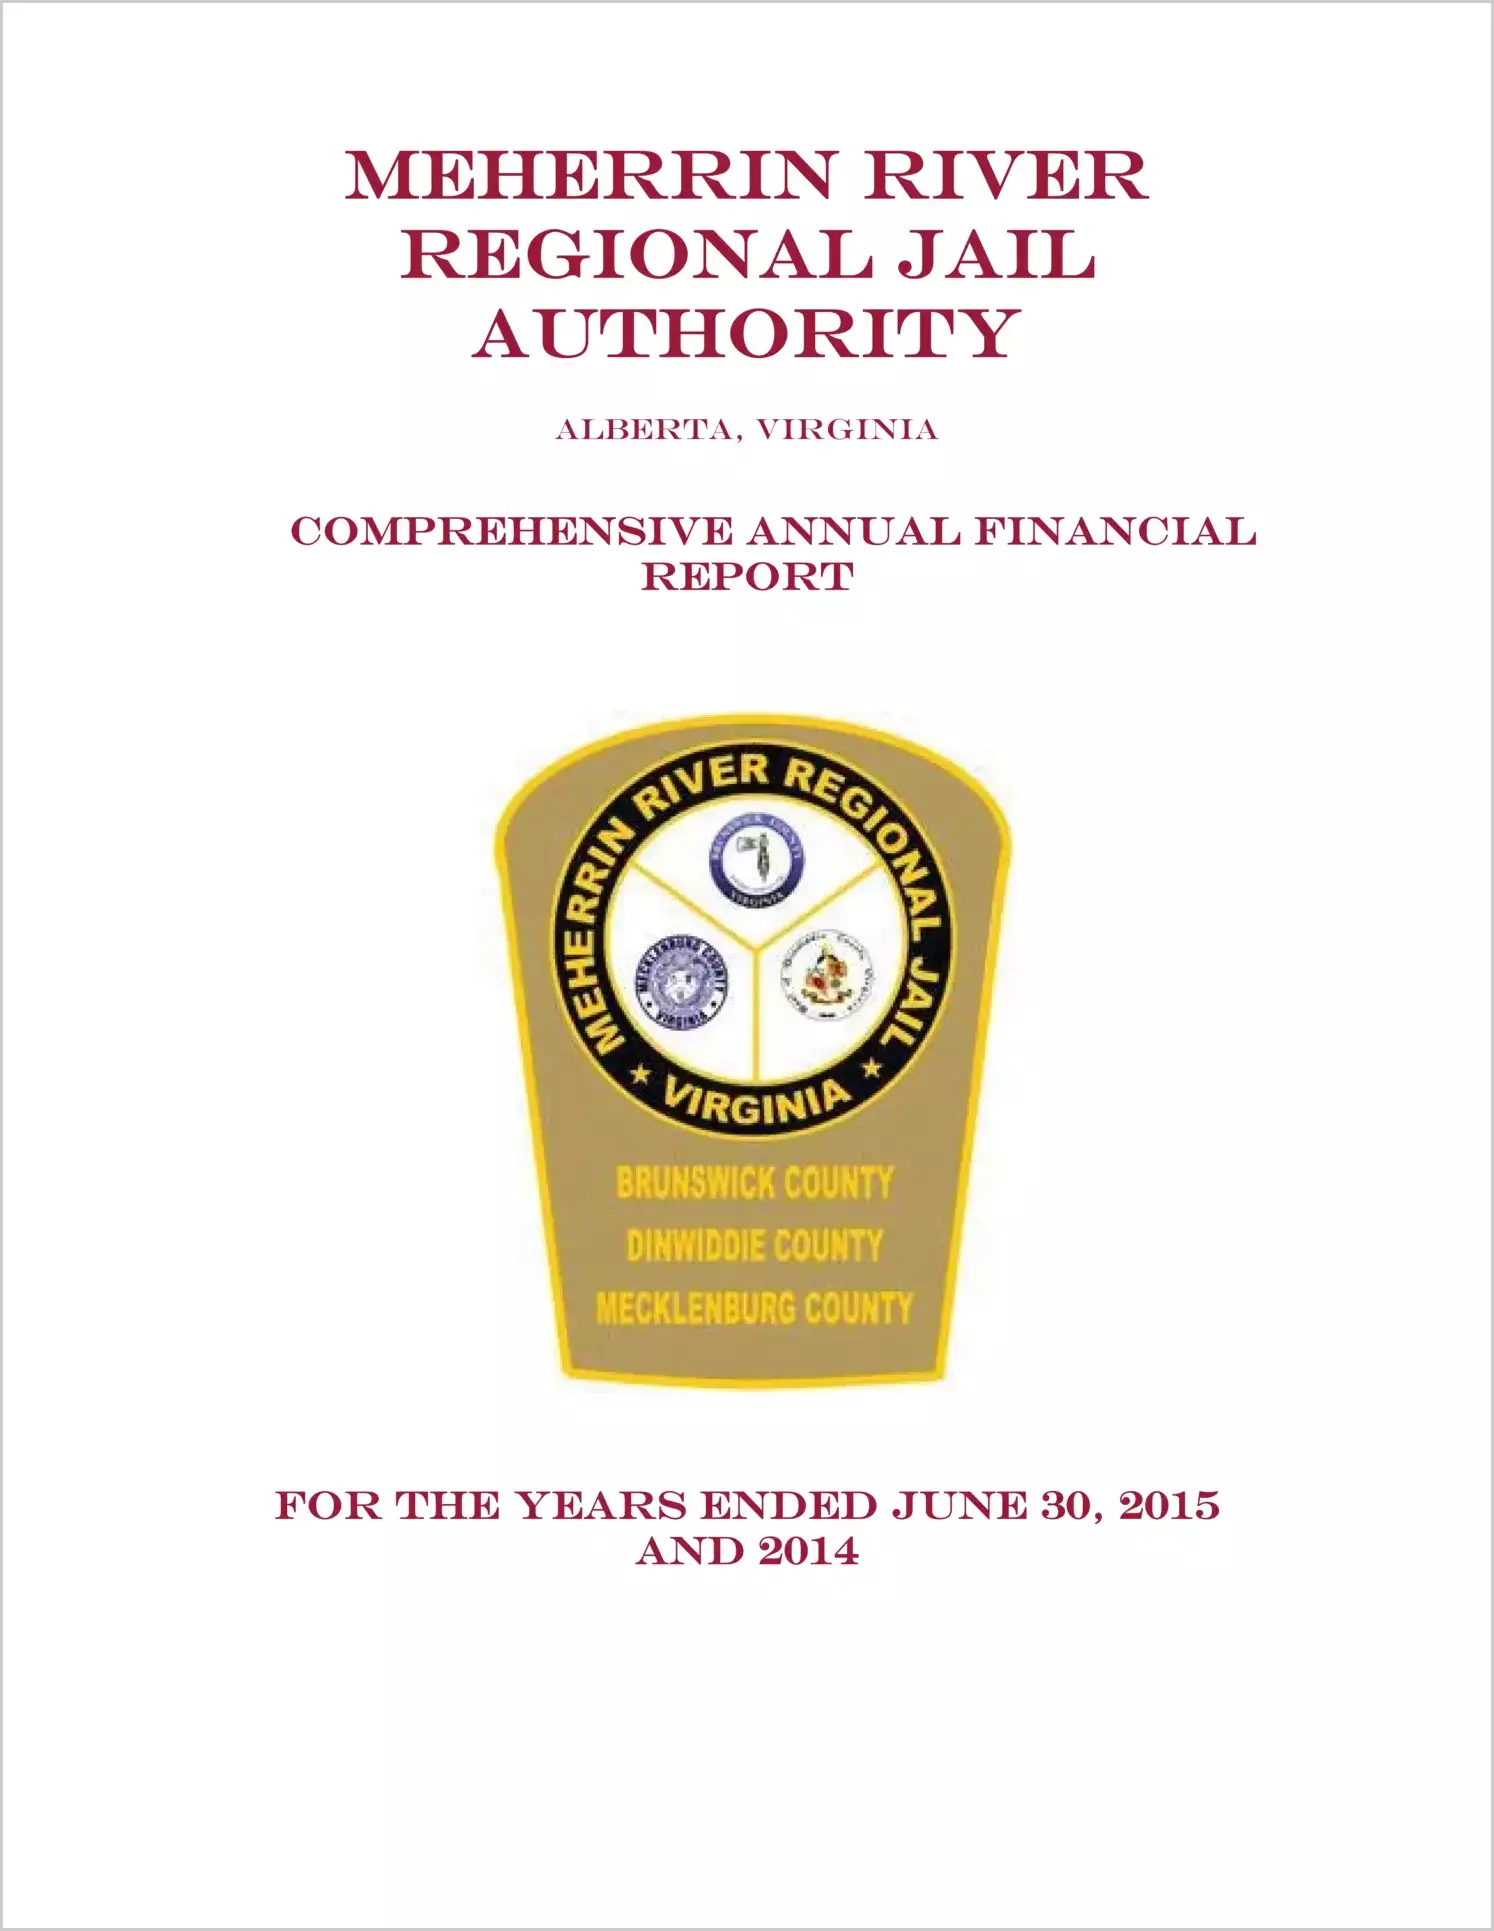 2015 ABC/Other Annual Financial Report  for Meherrin River Regional Jail Authority